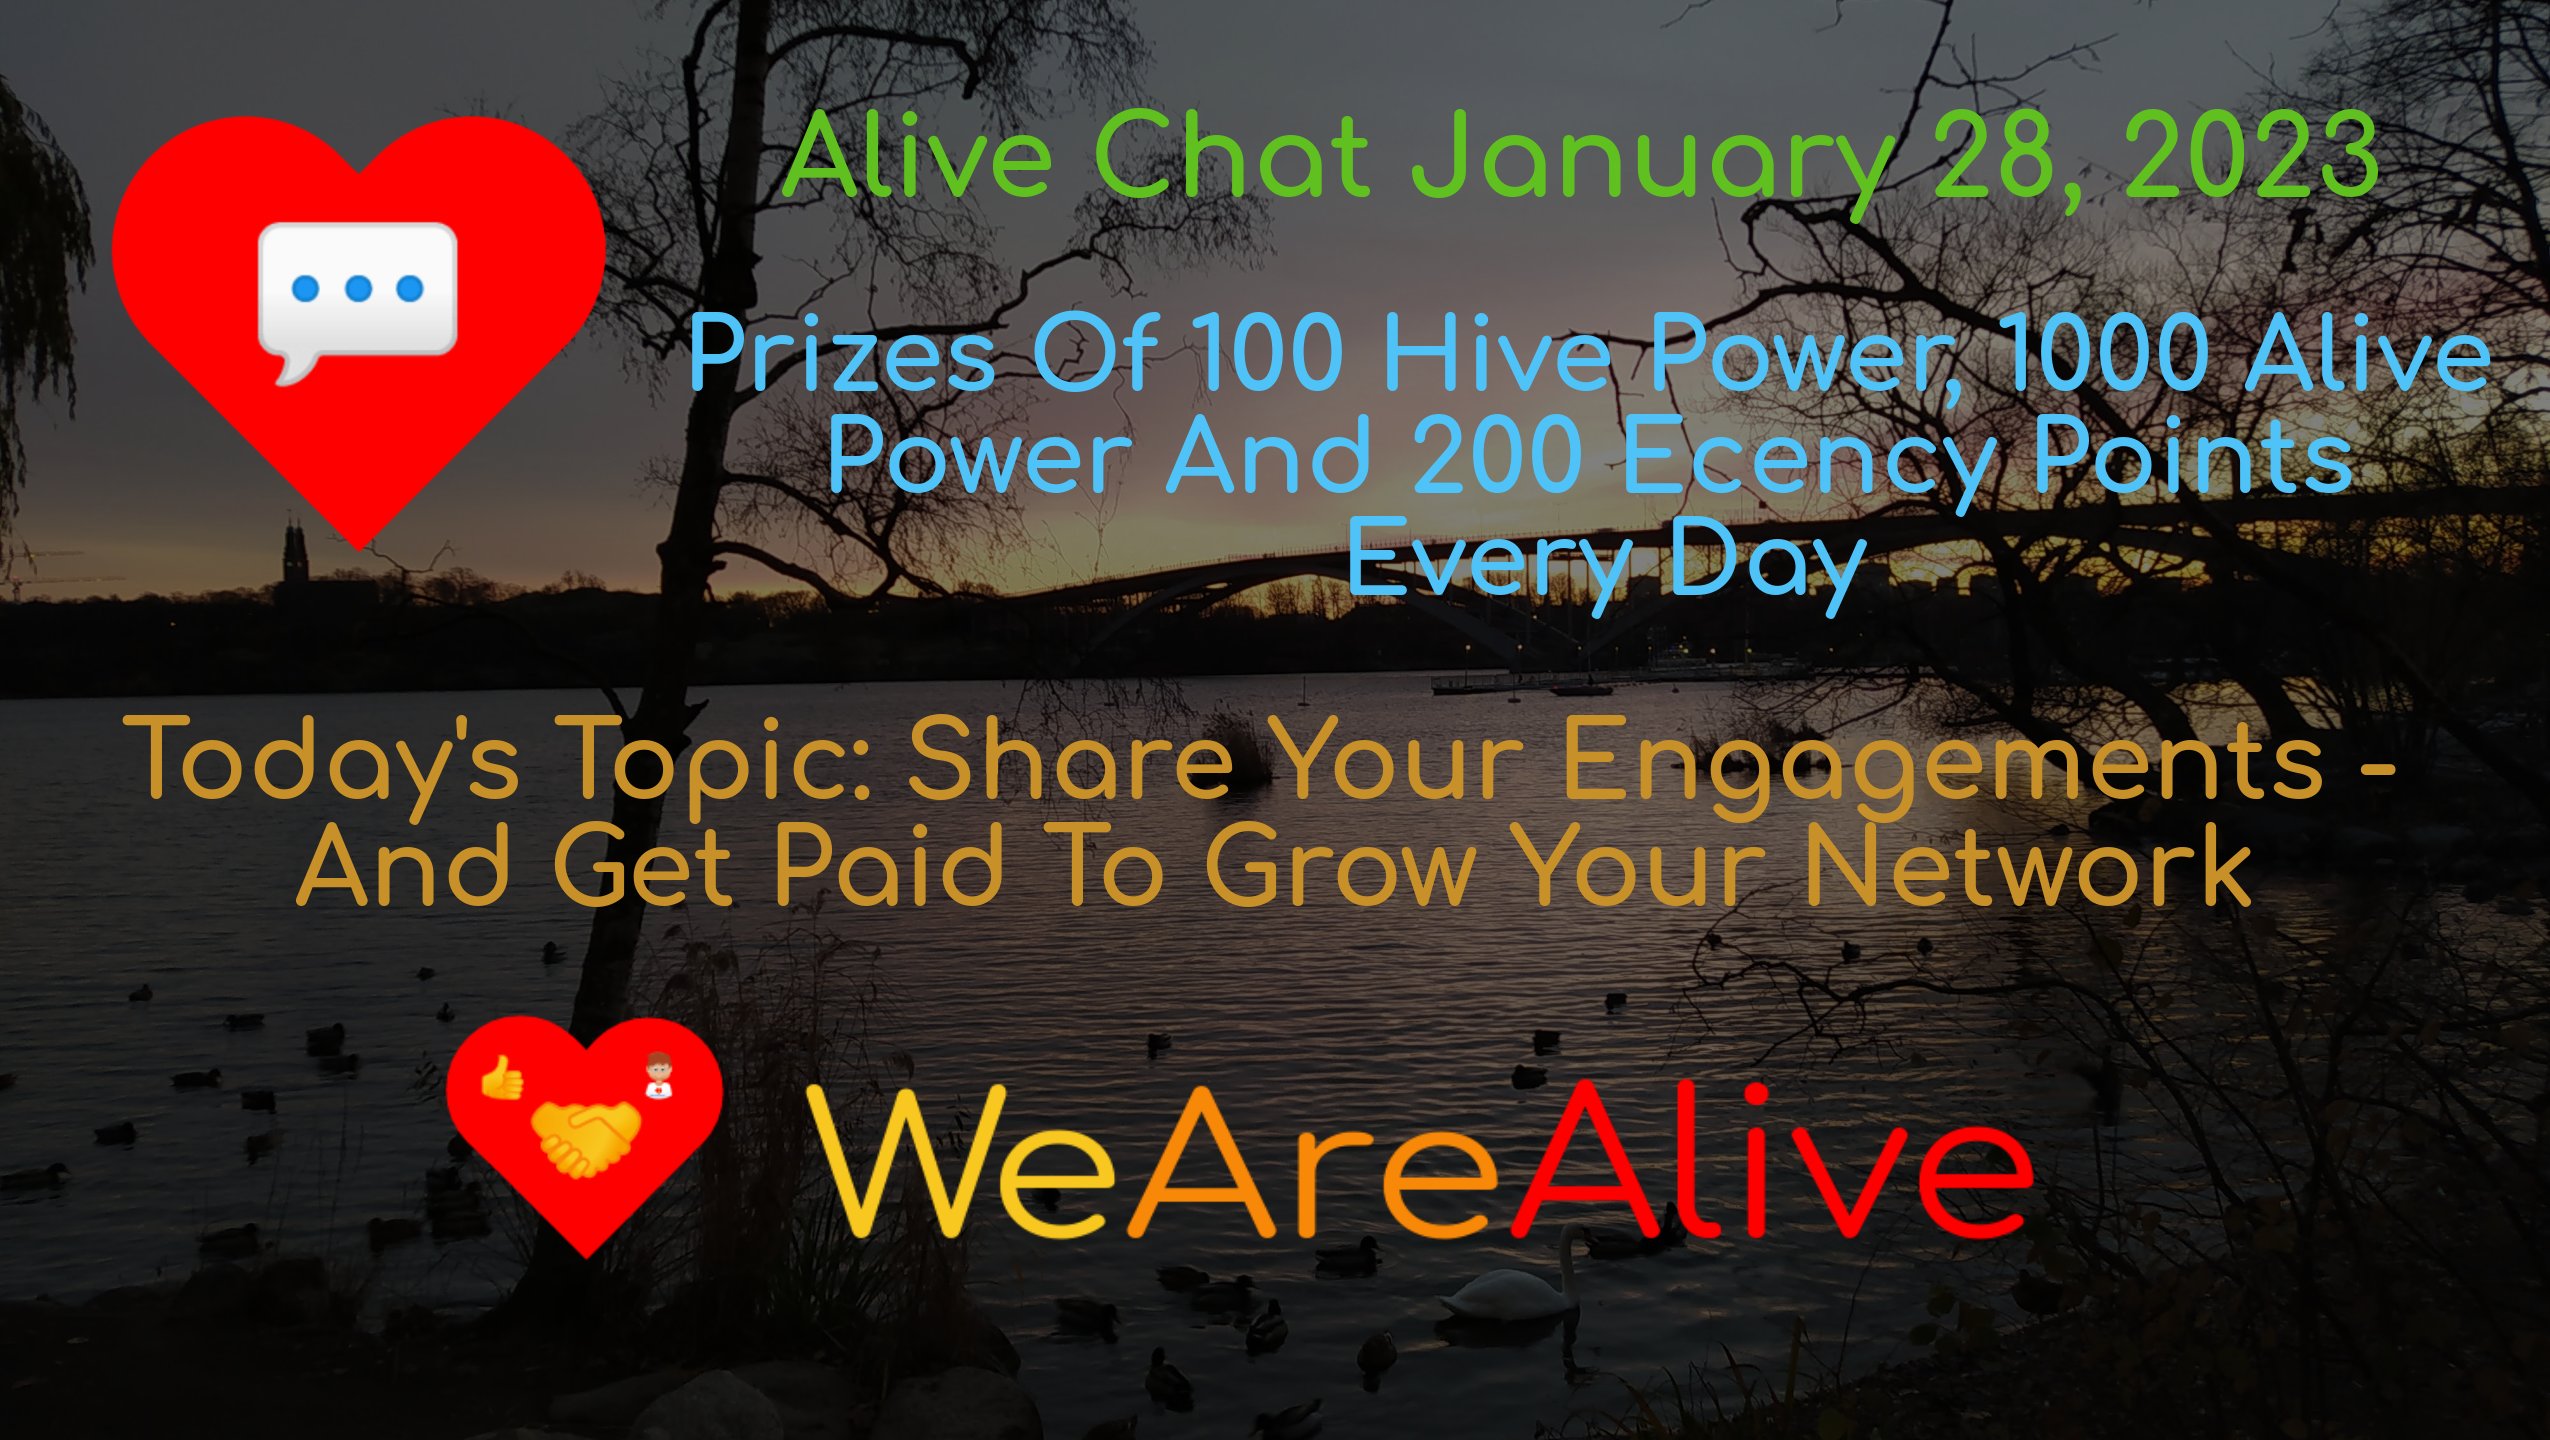 @alive.chat/alive-chat-january-28-2023